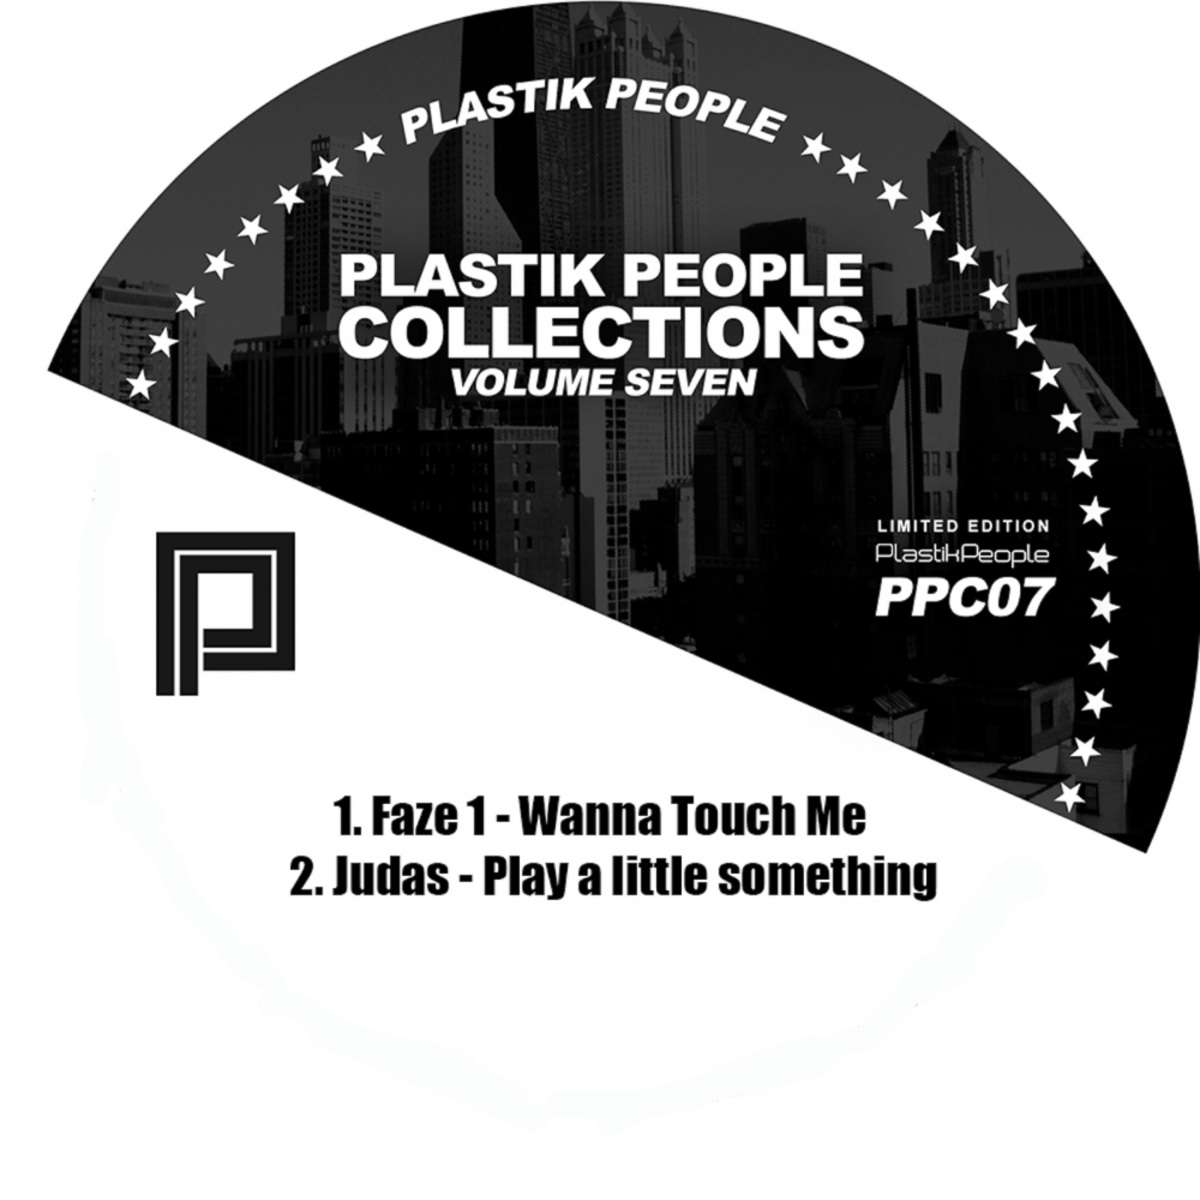 Faze 1 & Judas - Collections, Vol. 7 B Side / Plastik People Collections